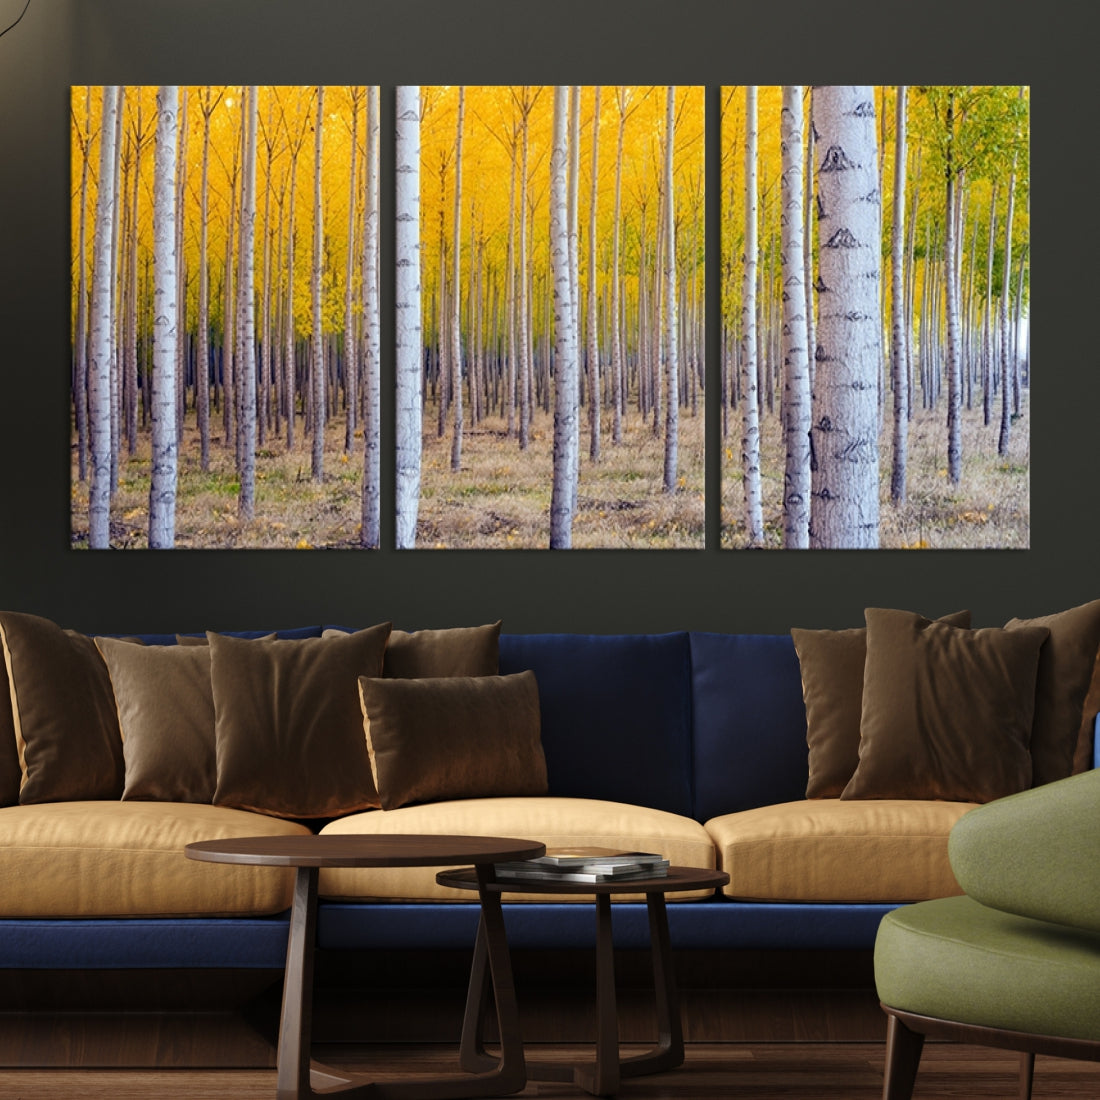 Birch Trees Forest in Autumn Wall Art Print